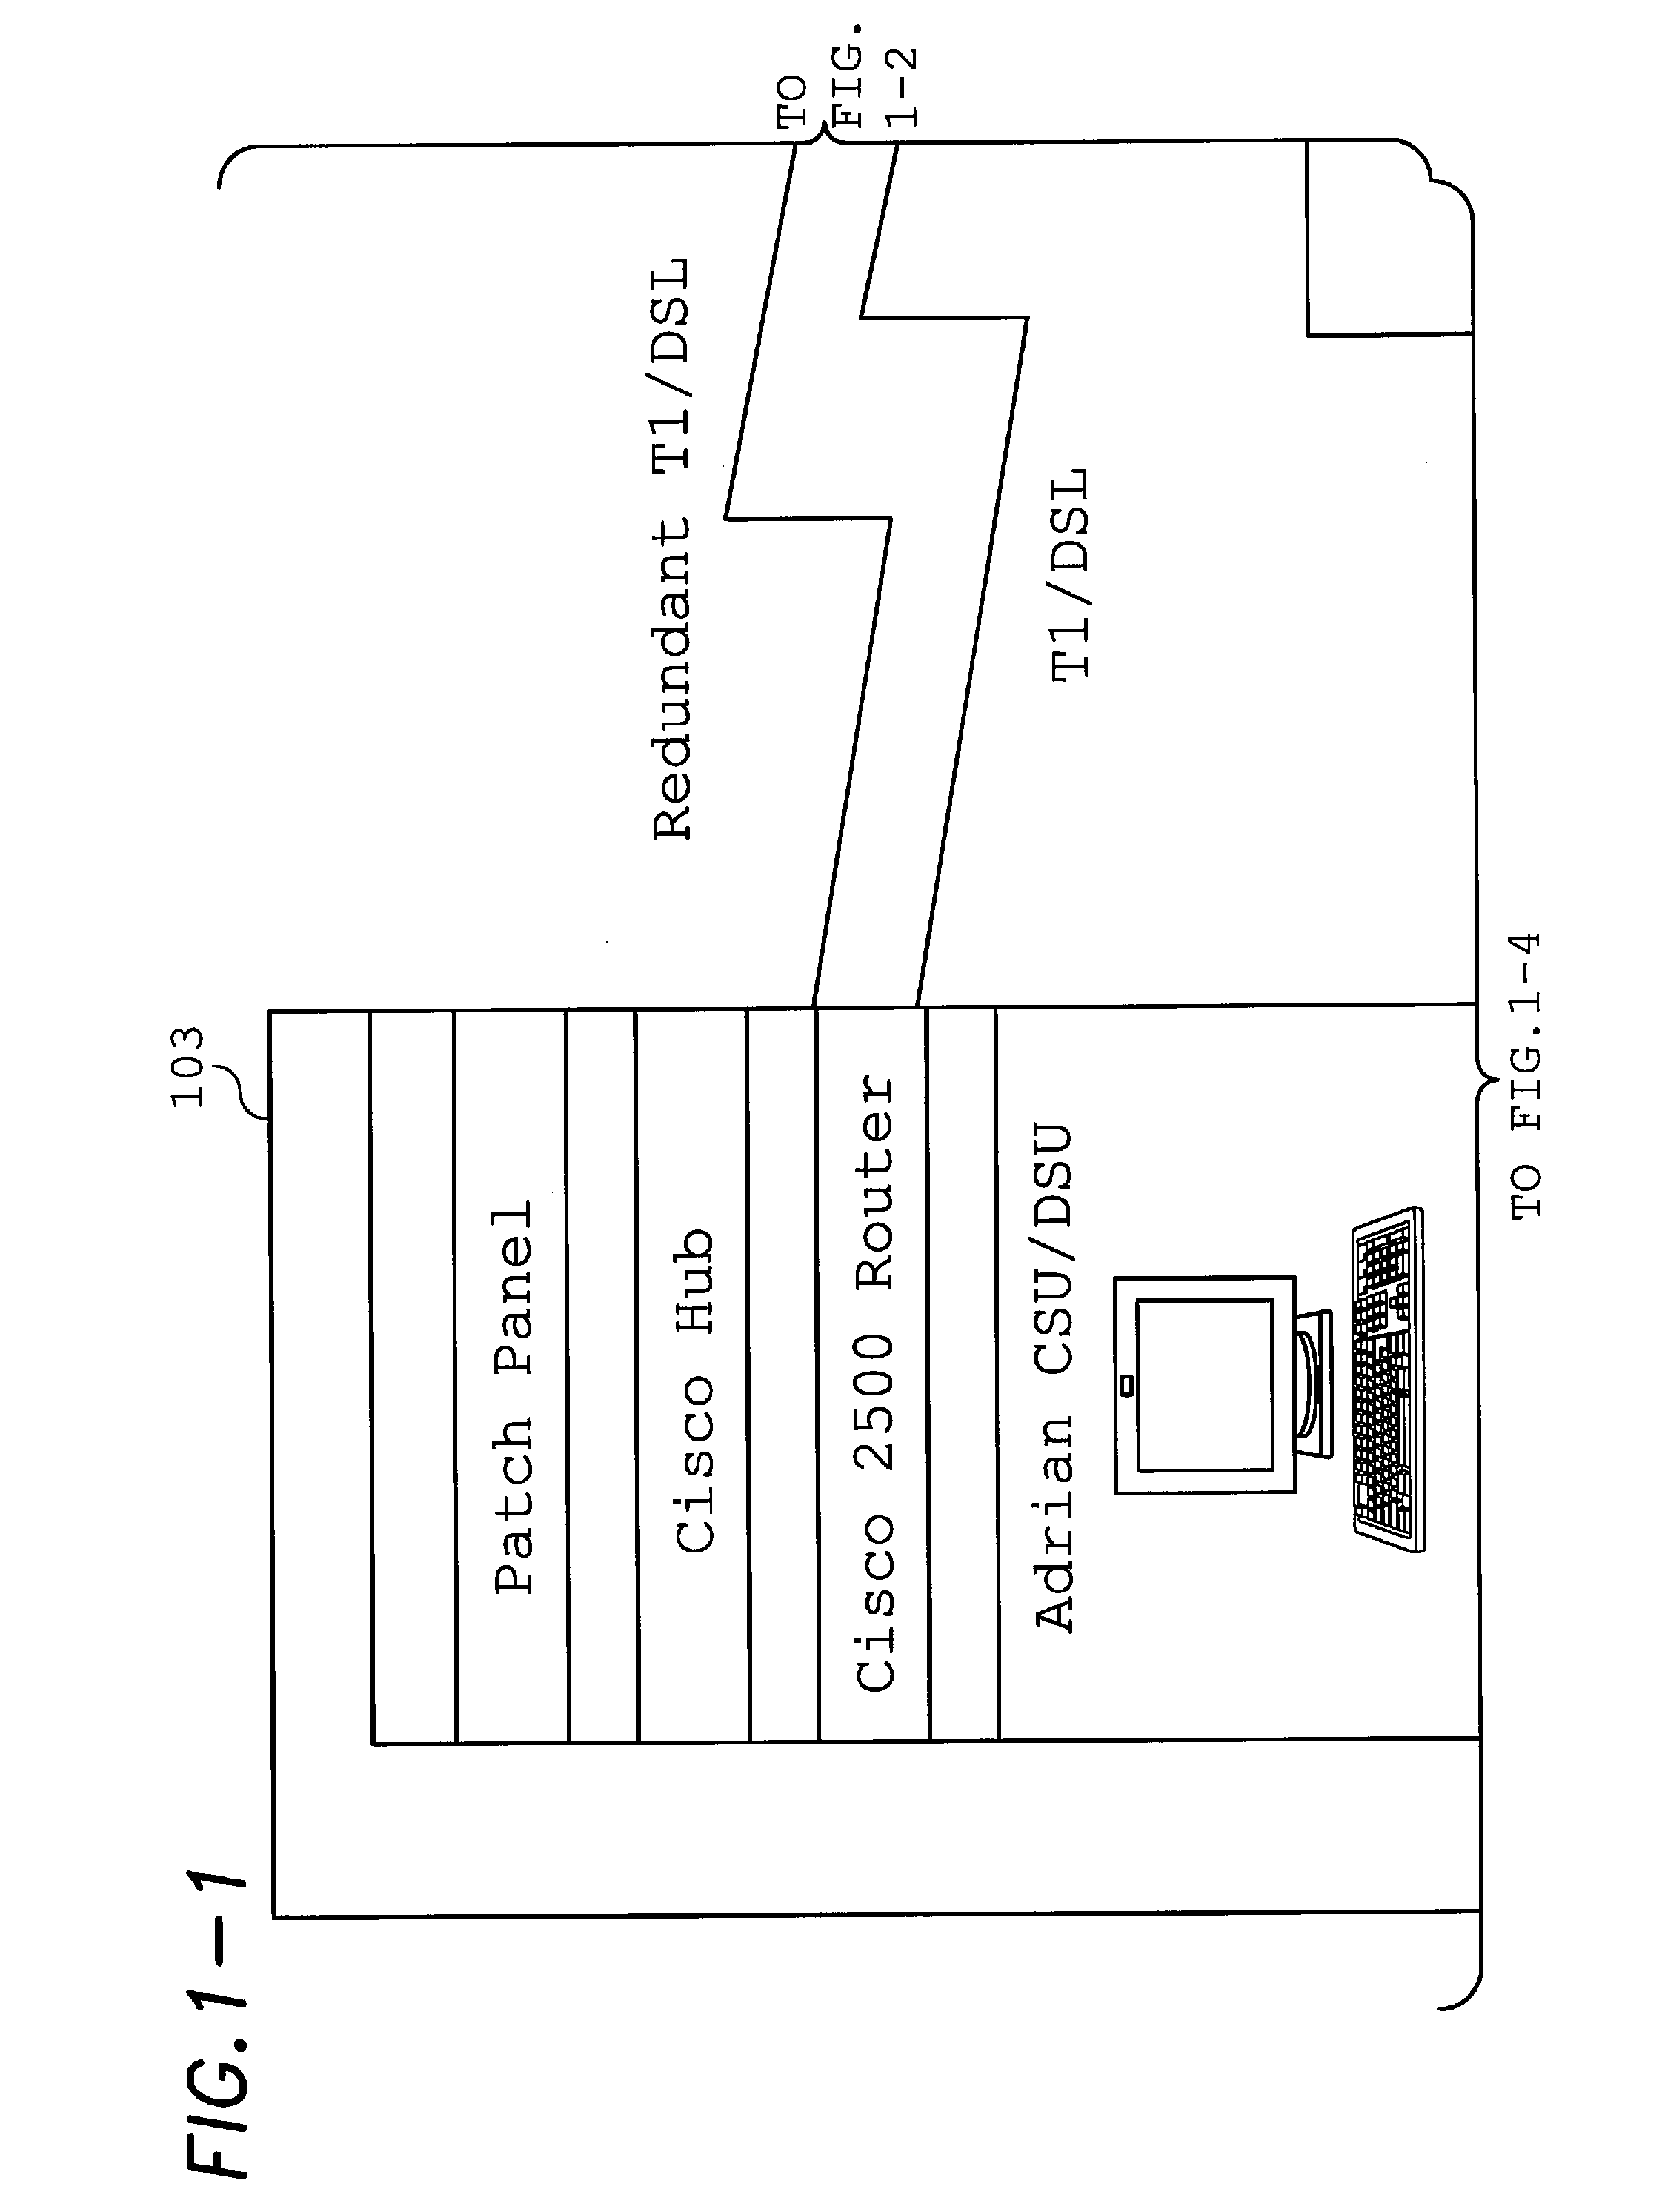 Wireless electronic prescription scanning and management system